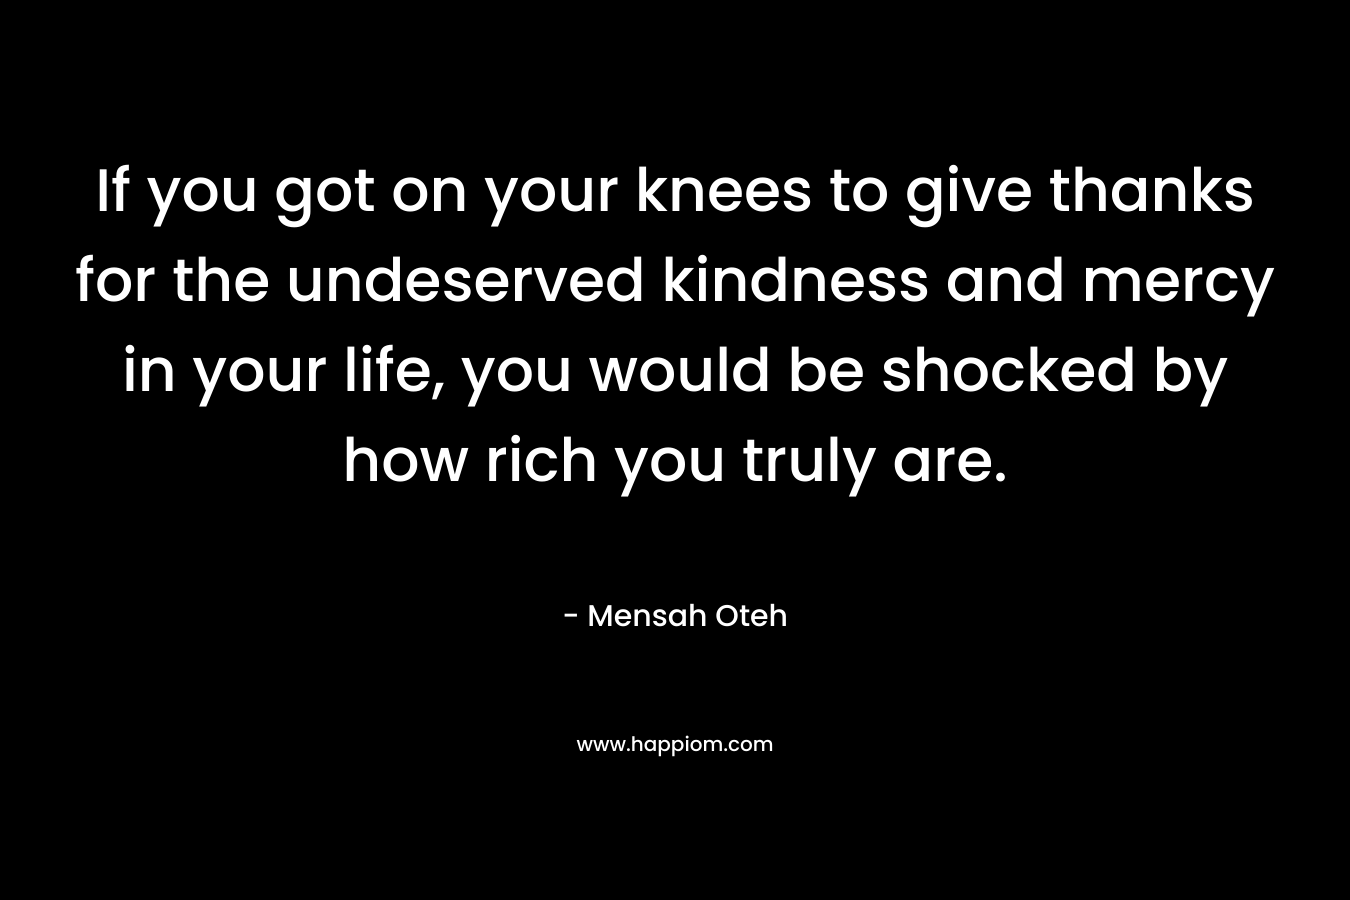 If you got on your knees to give thanks for the undeserved kindness and mercy in your life, you would be shocked by how rich you truly are. – Mensah Oteh